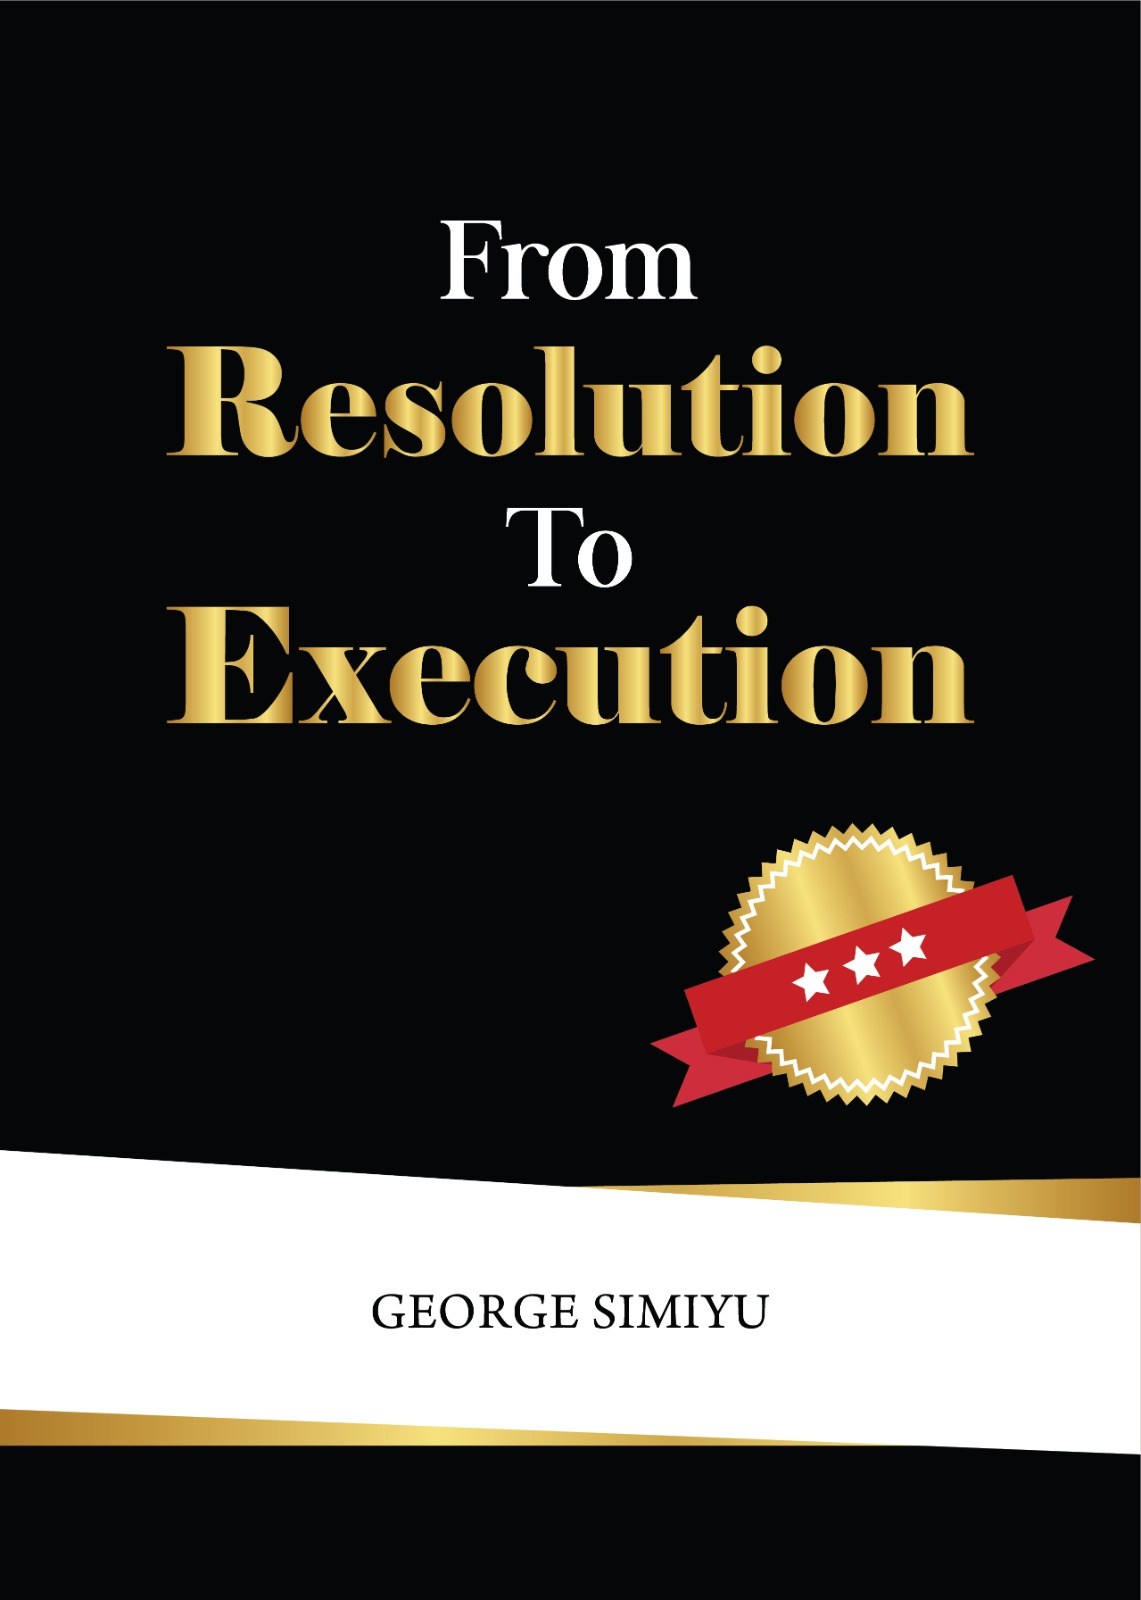 From Resolution To Execution